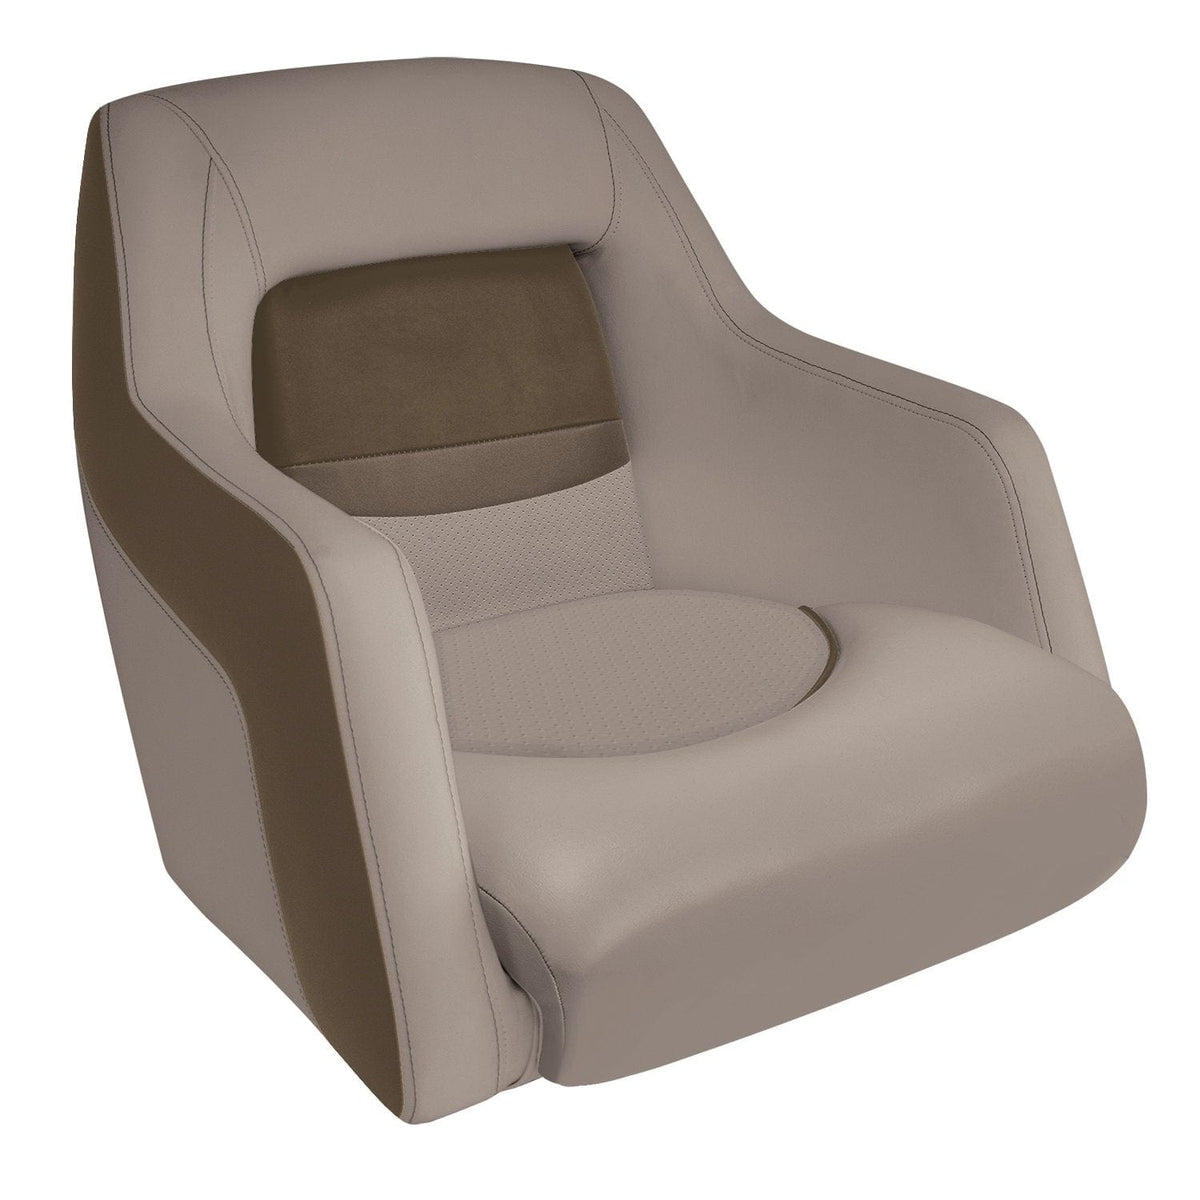 Wise Not Qualified for Free Shipping Wise Pontoon Traditional Style Bucket Seat #BM11010-1749